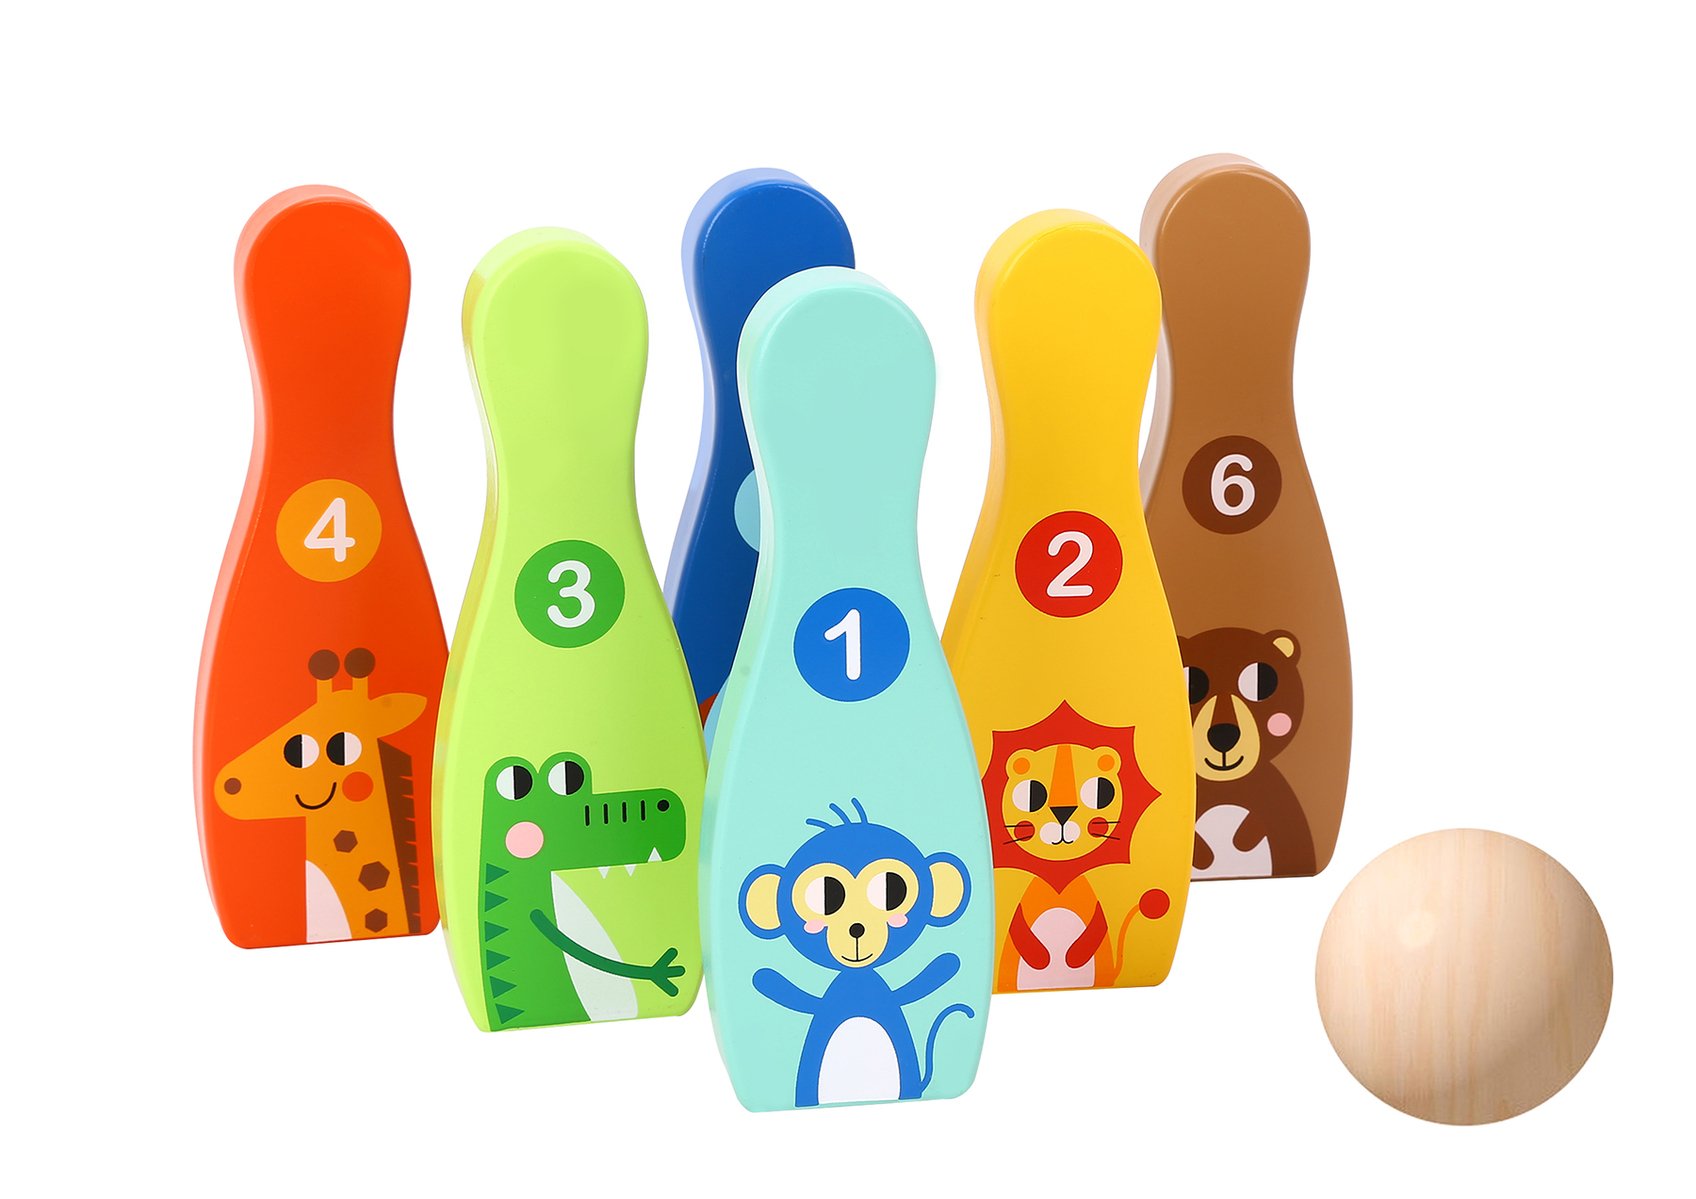 Tooky Toy Bowling Game